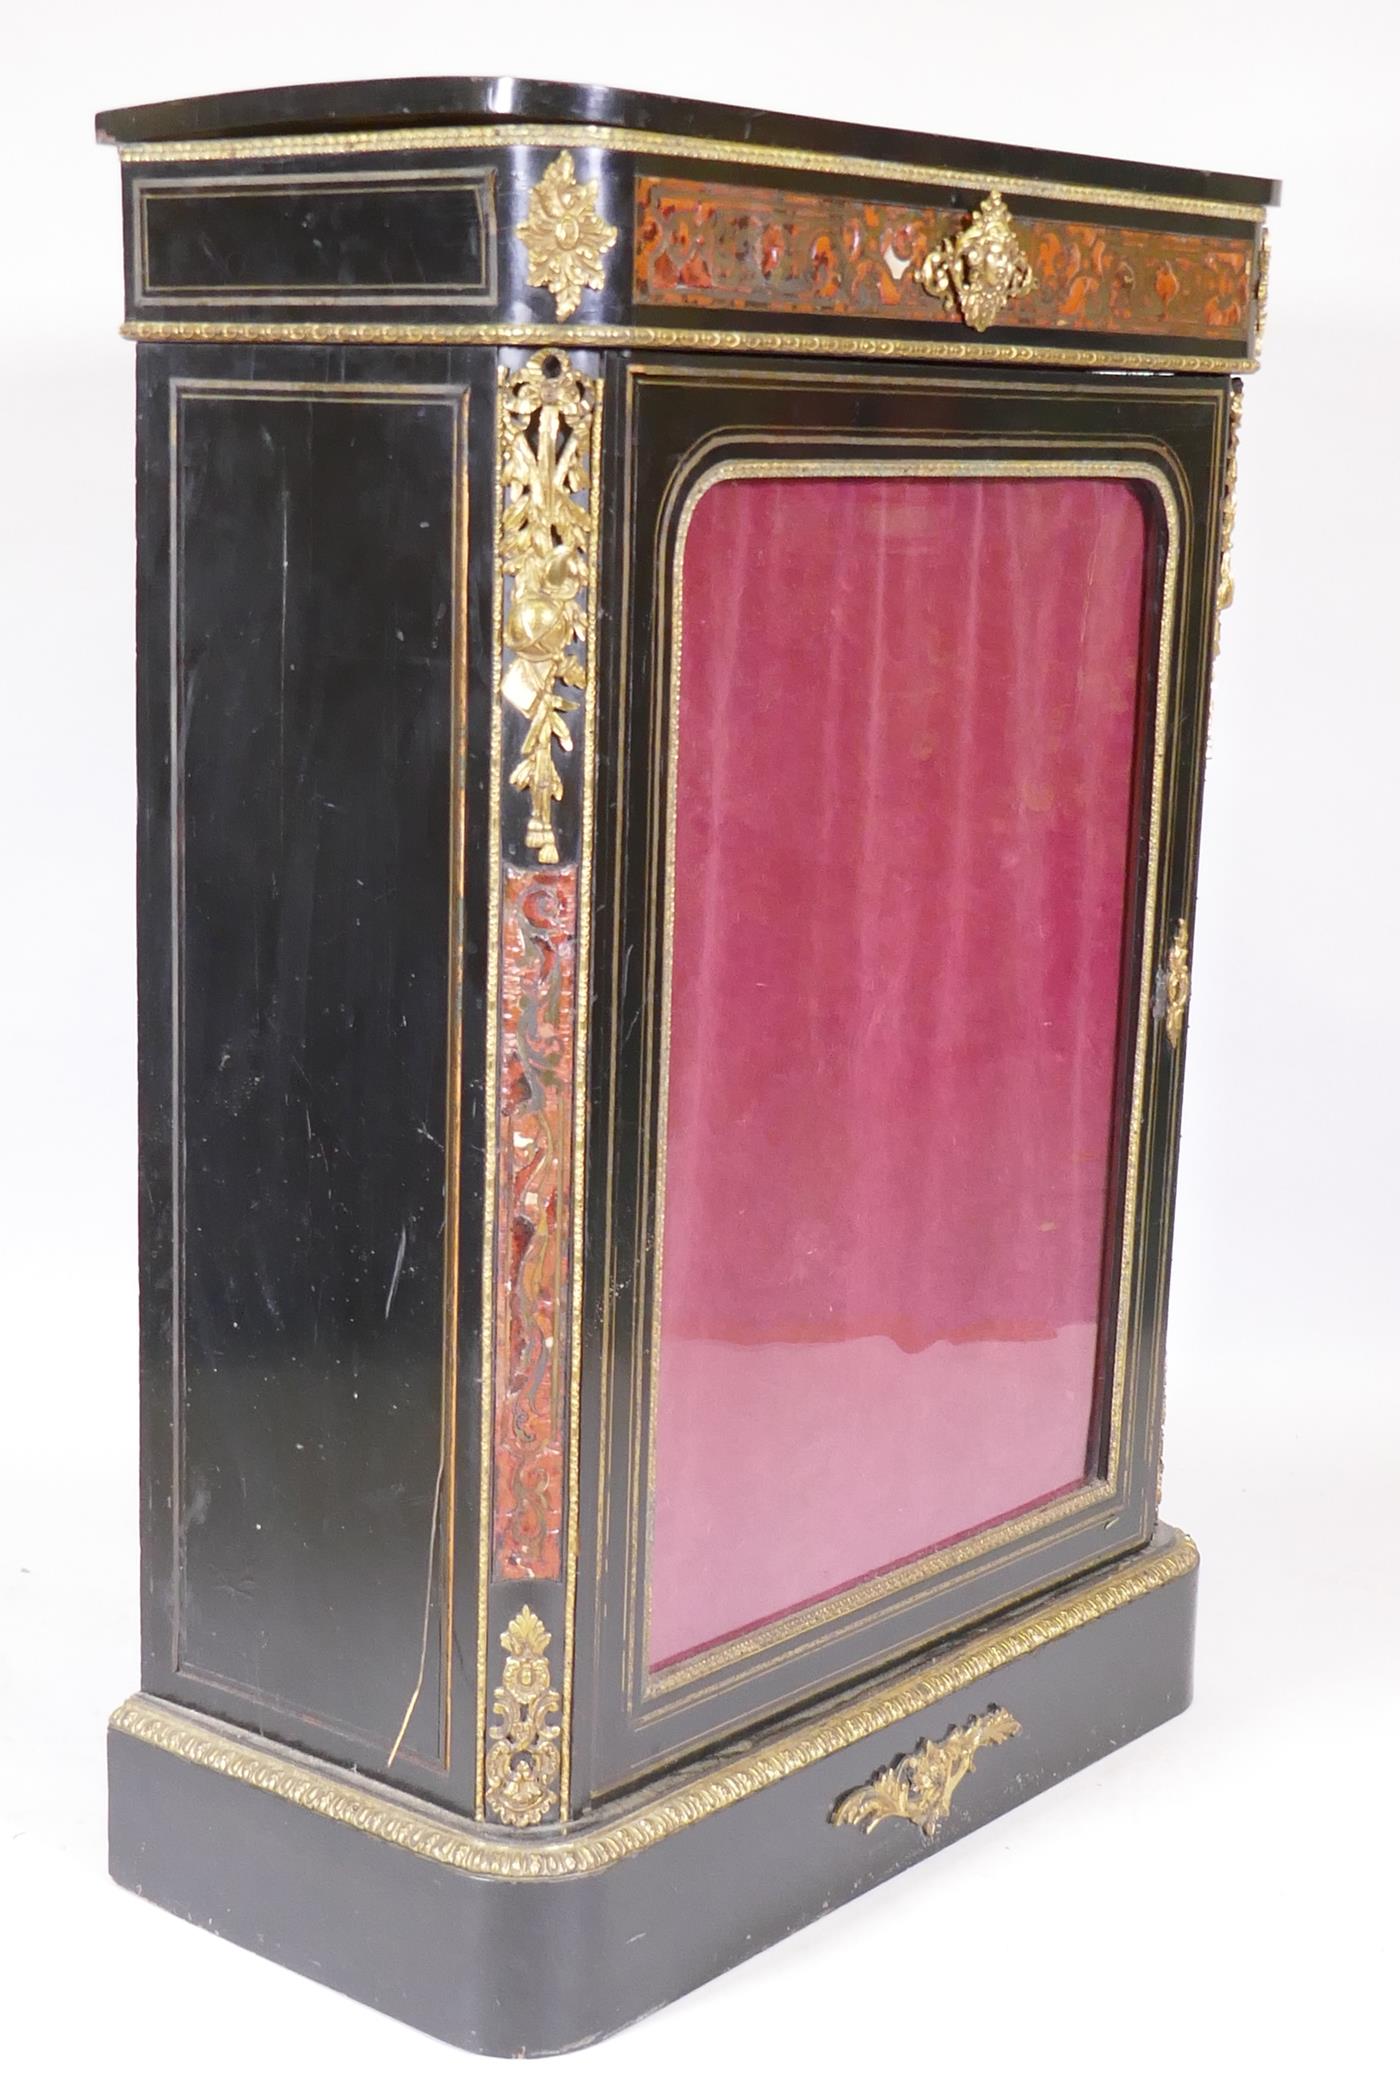 A C19th boulework pier cabinet, with ebonised top and brass mounts and single door, 30" x 15" x 43" - Image 4 of 8